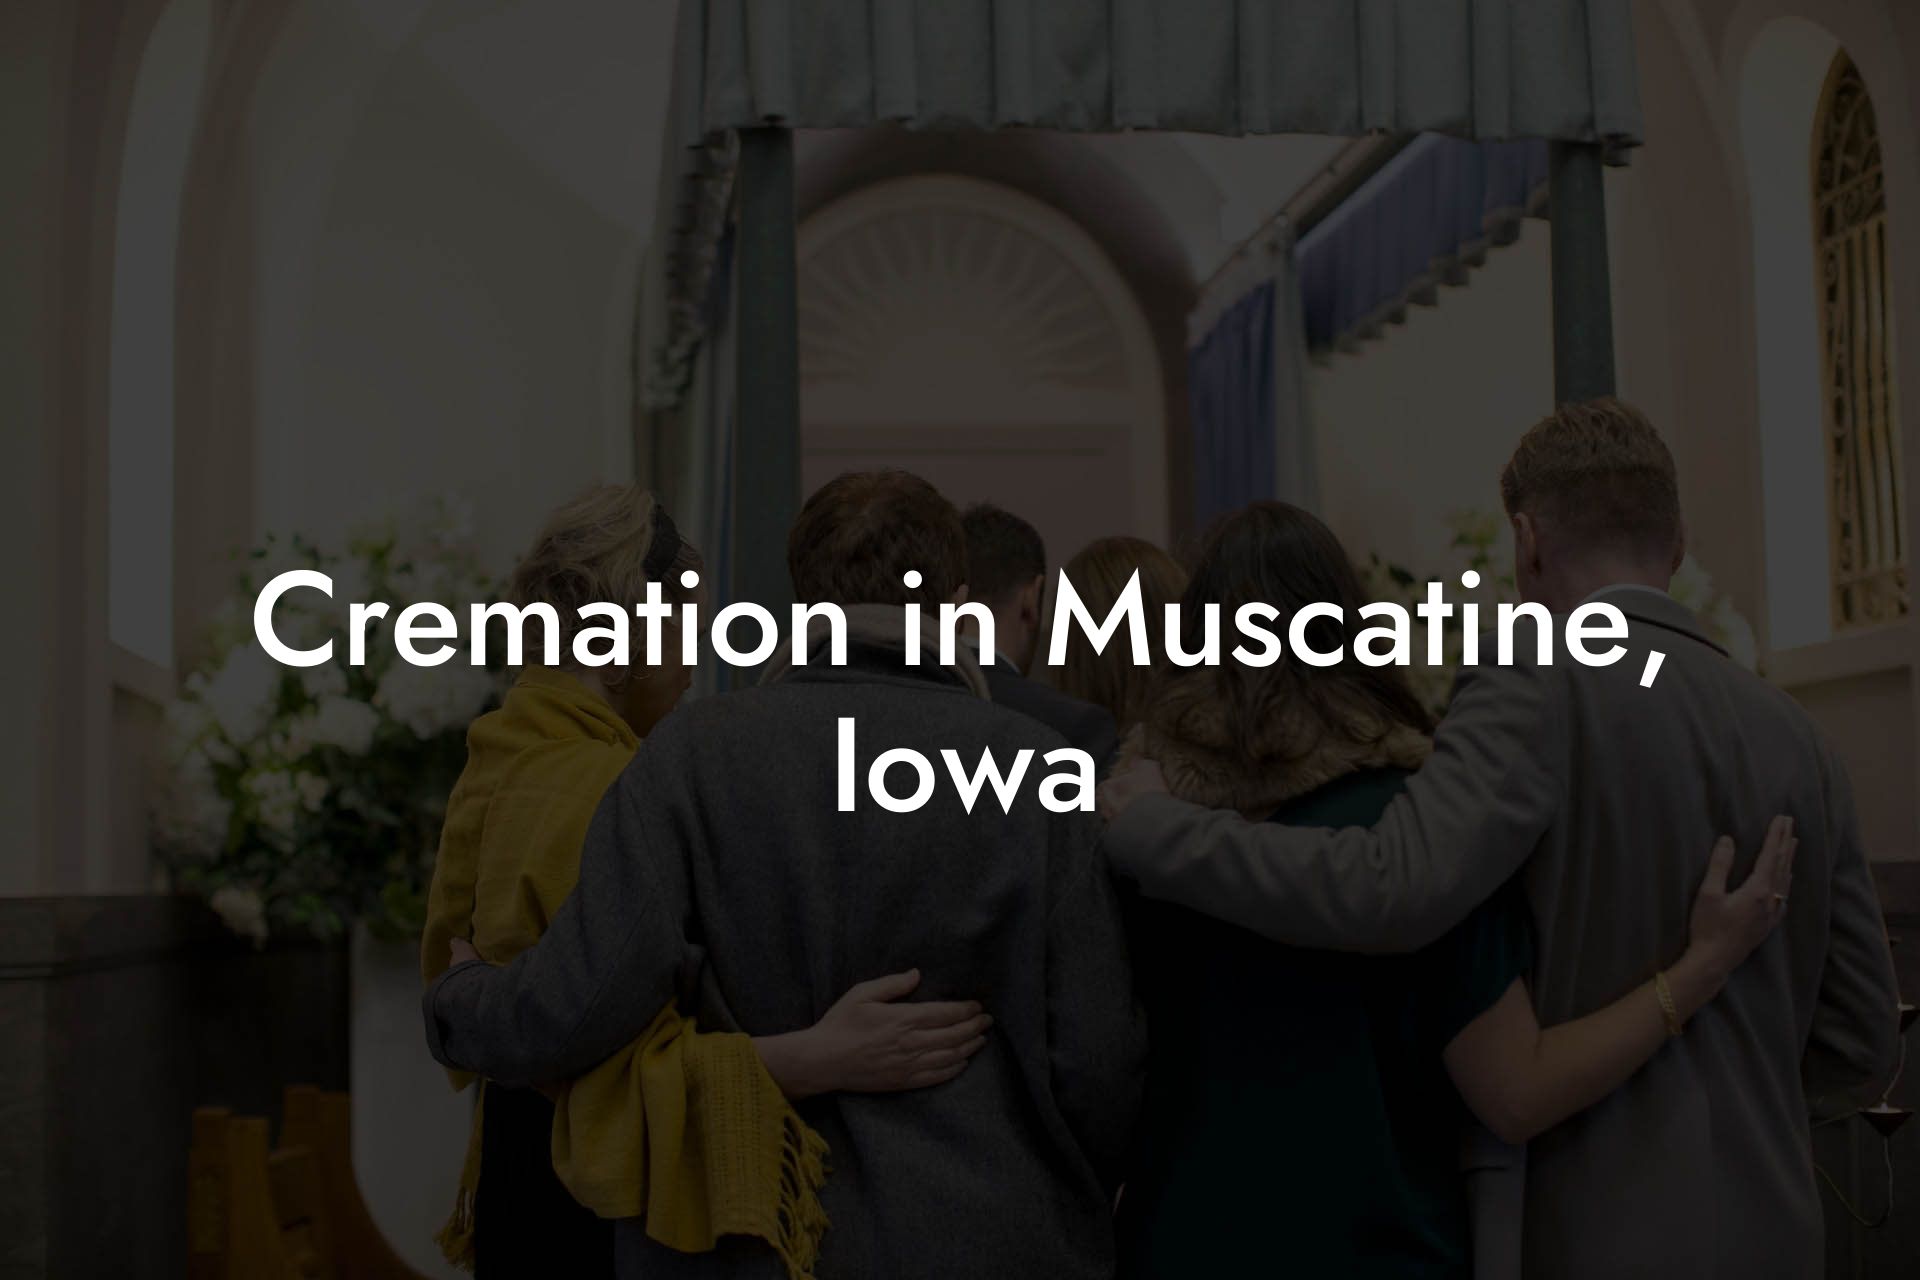 Cremation in Muscatine, Iowa